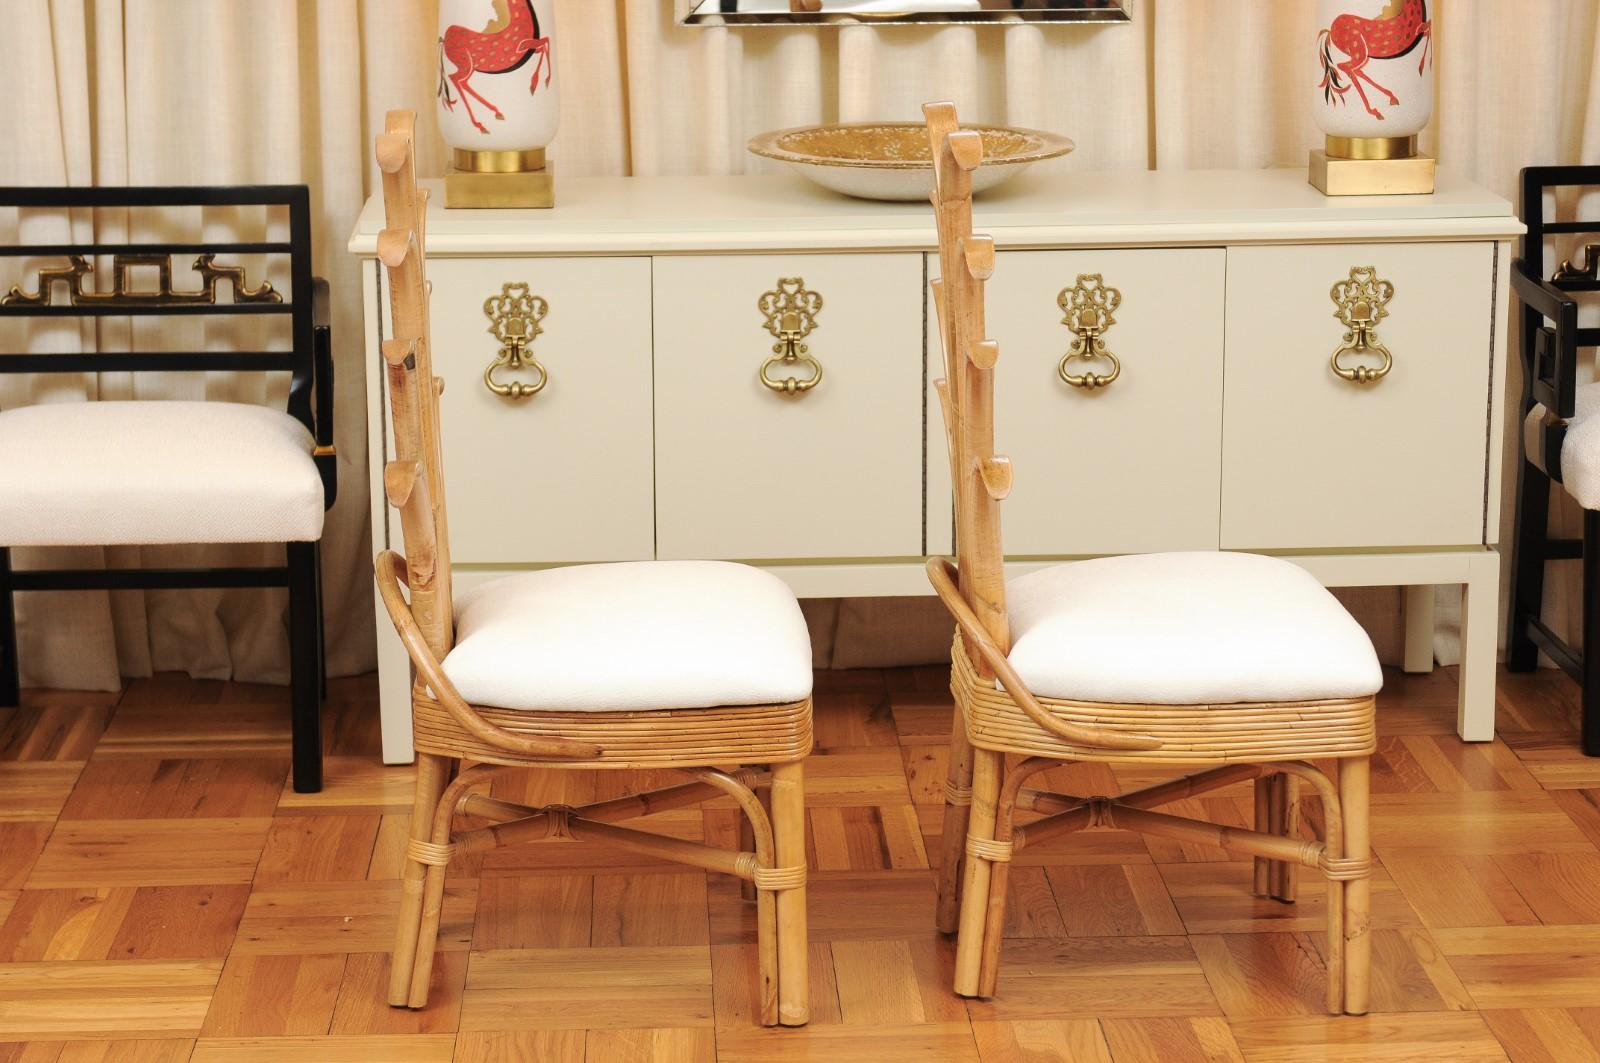 Exquisite Set of 8 Rattan and Cane Palm Frond Dining Chairs, circa 1950 In Excellent Condition For Sale In Atlanta, GA